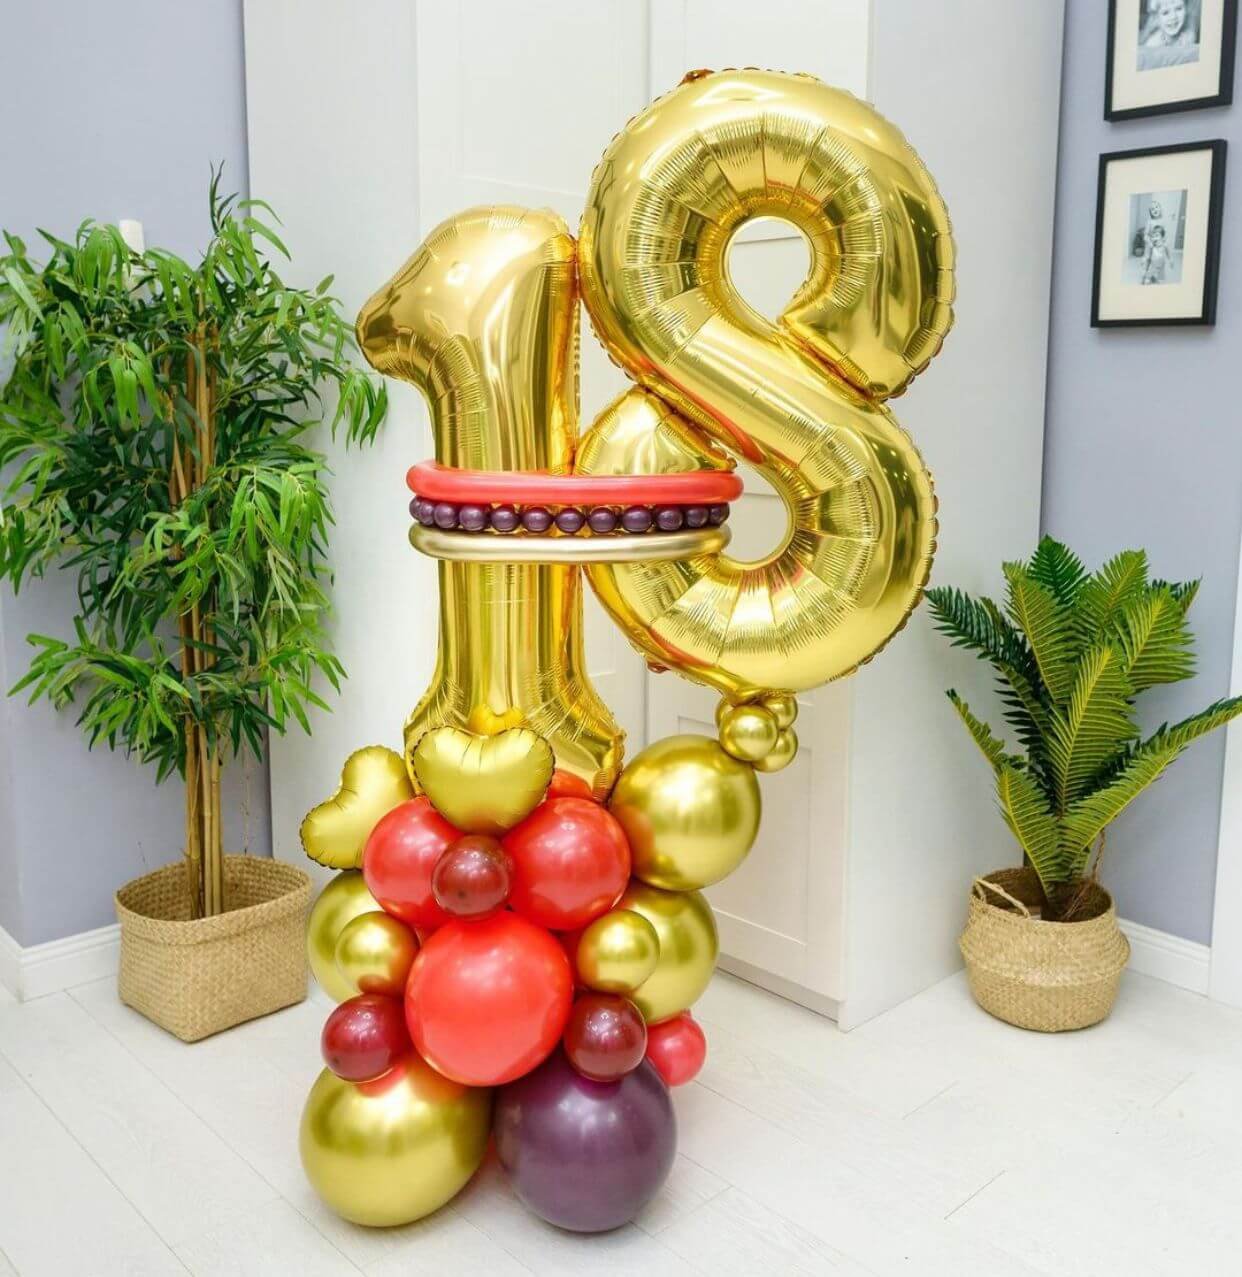 Multicolored balloons and numbered foil balloons for celebrations